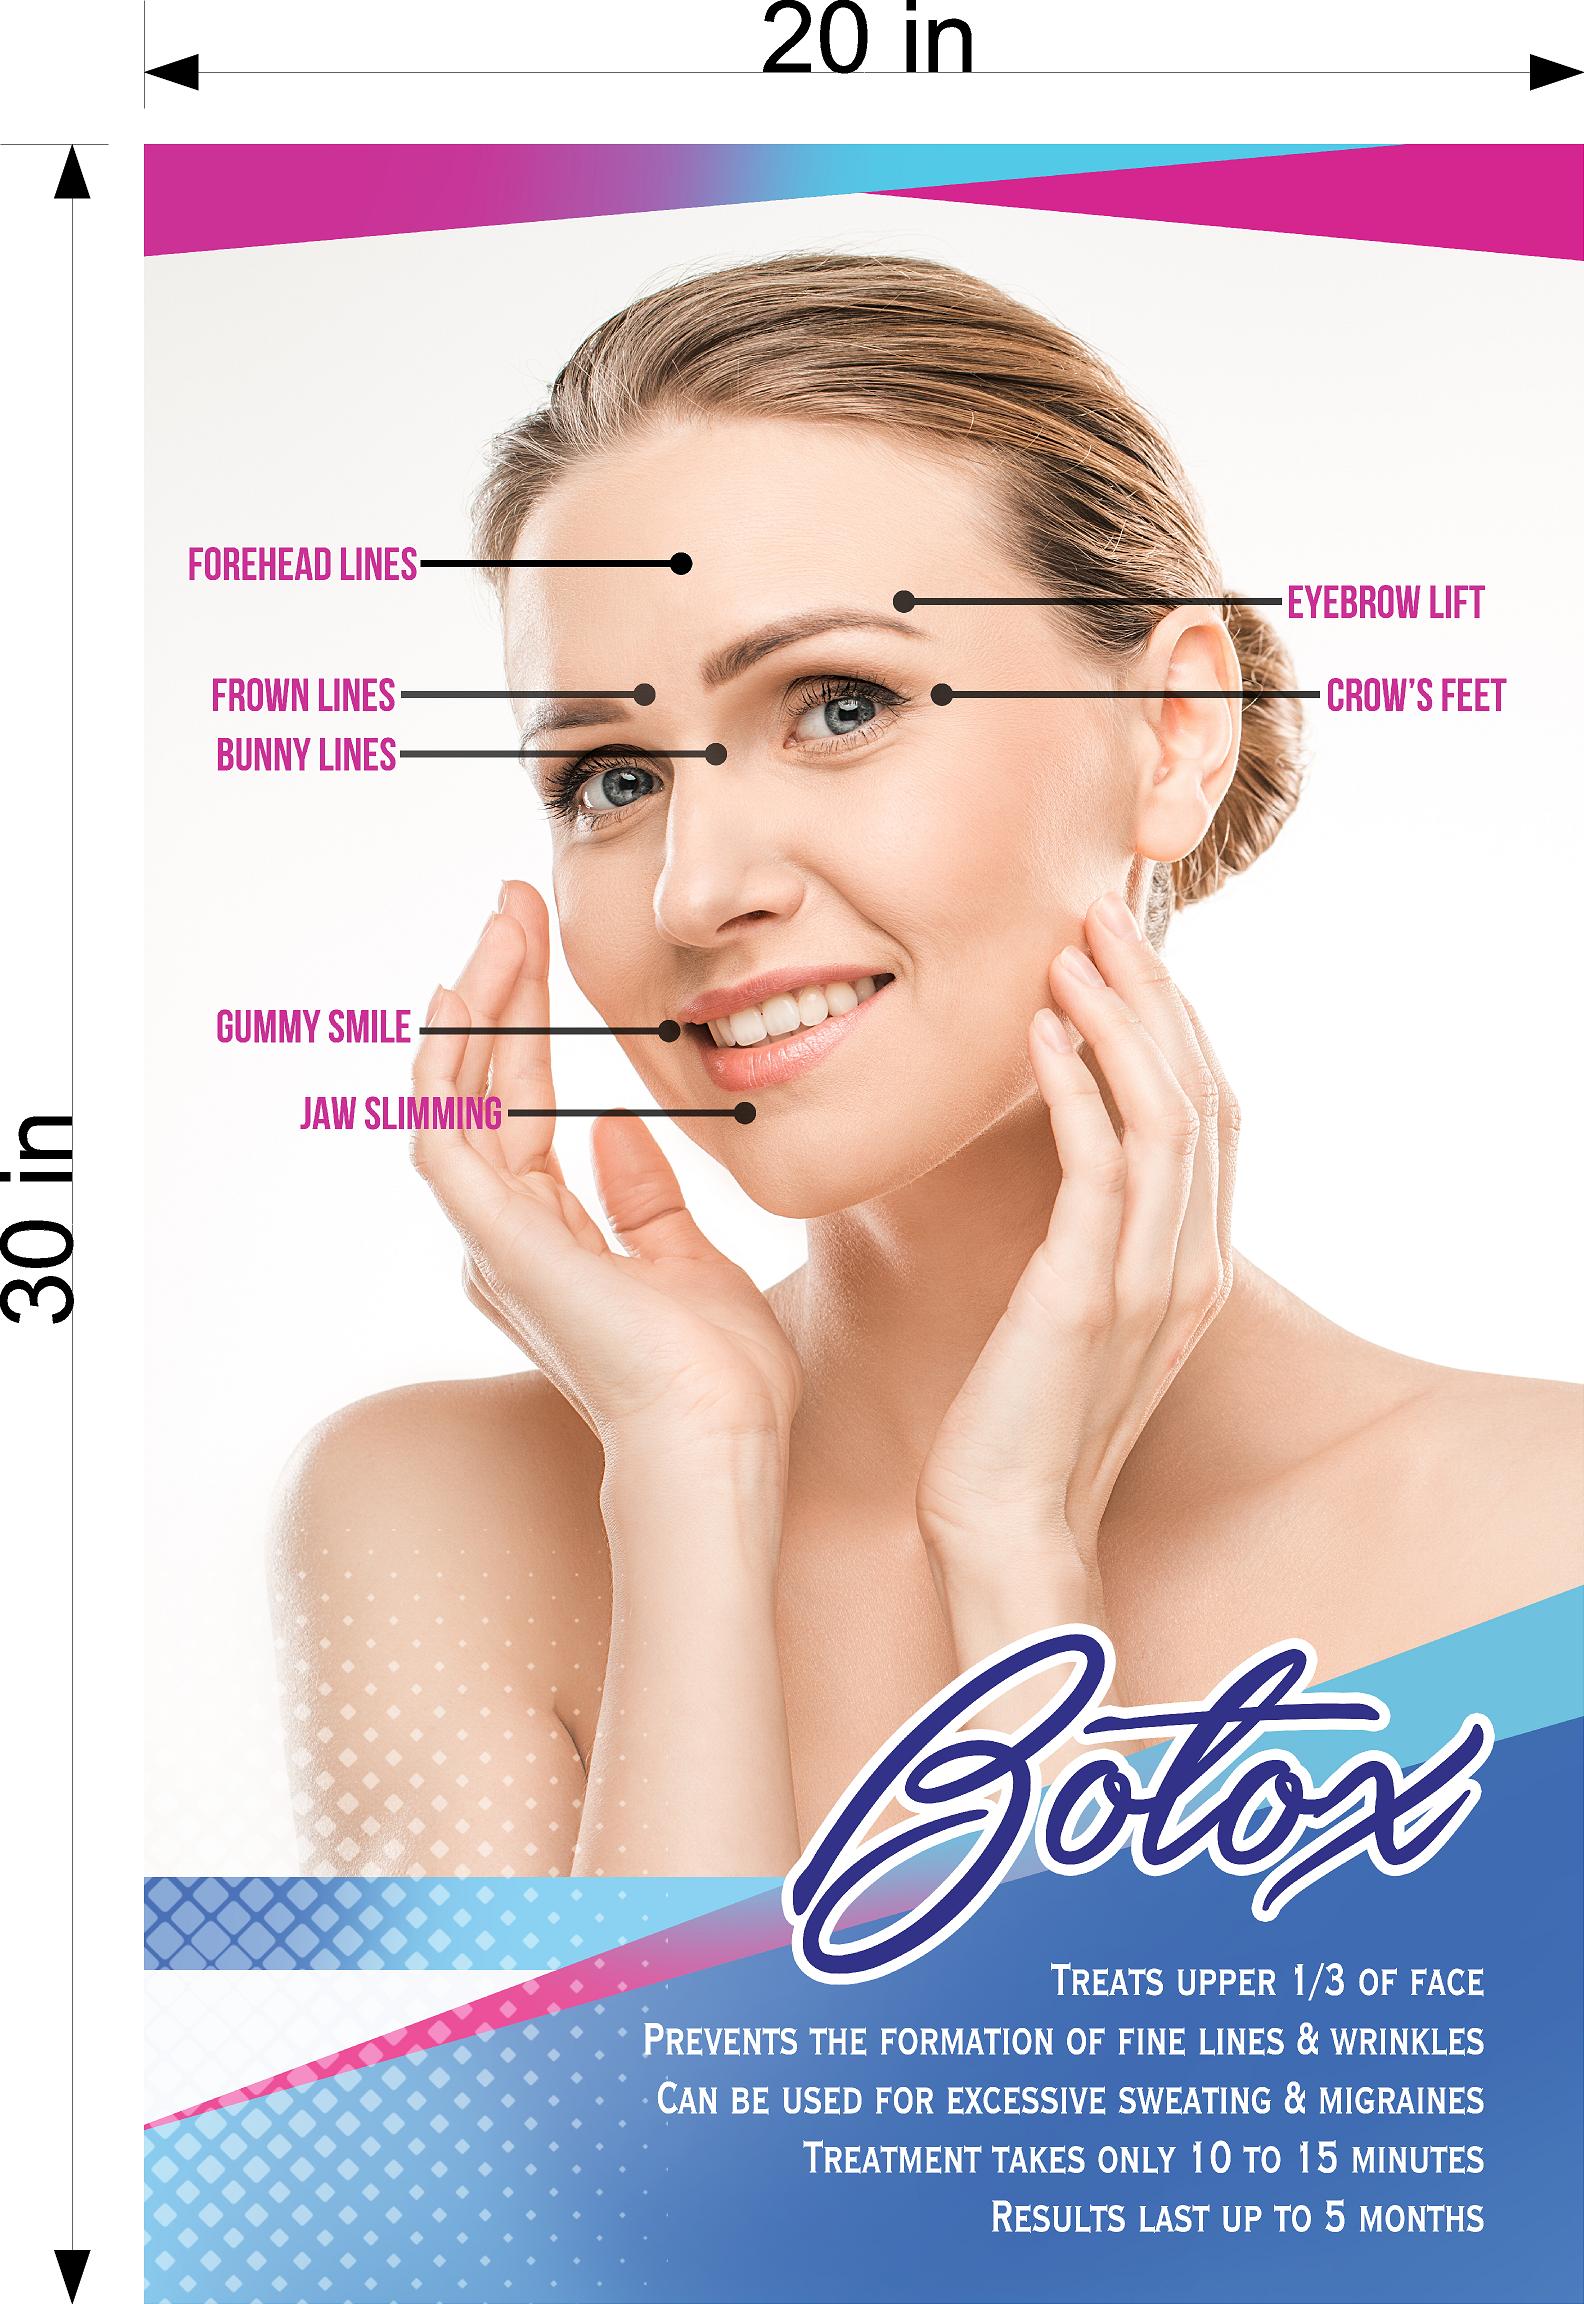 Botox 04 Photo-Realistic Paper Poster Premium Interior Inside Sign Advertising Marketing Wall Window Non-Laminated Vertical